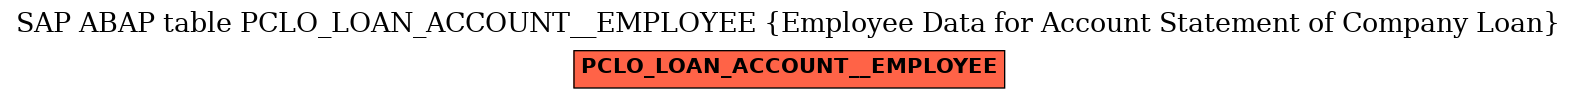 E-R Diagram for table PCLO_LOAN_ACCOUNT__EMPLOYEE (Employee Data for Account Statement of Company Loan)